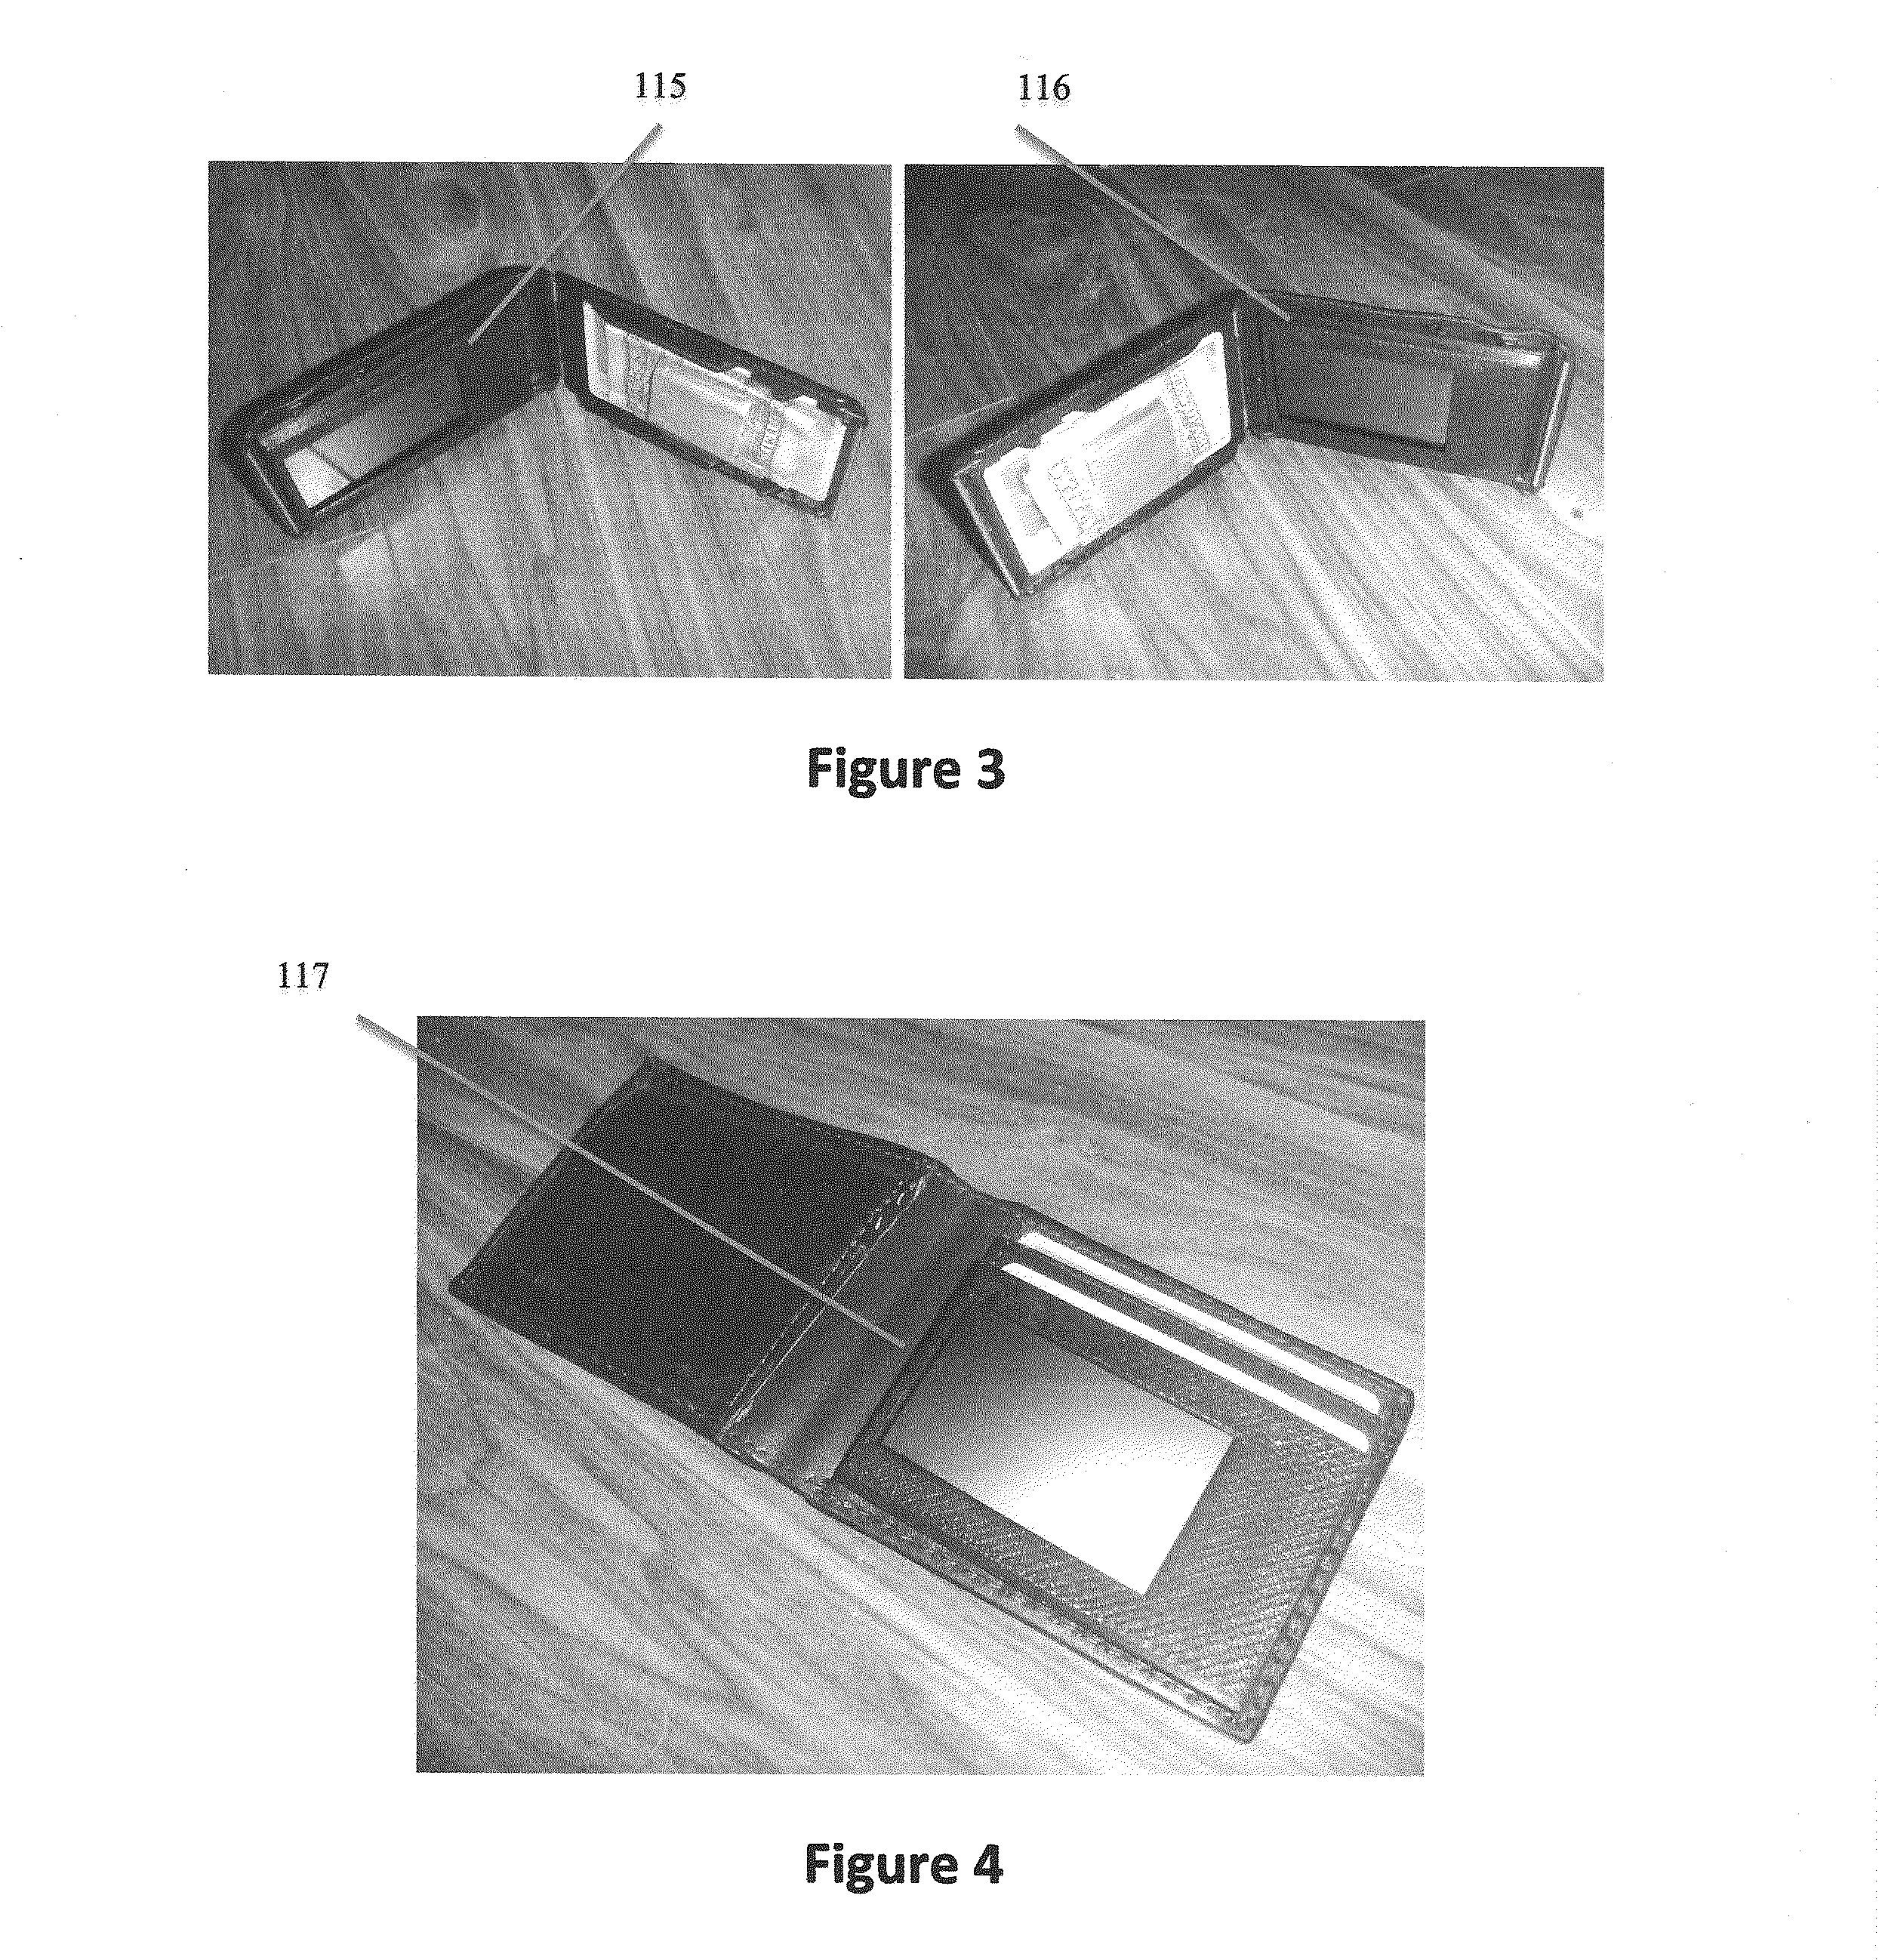 Method for Replacing Traditional Payment and Identity Management Systems and Components to Provide Additional Security and a System Implementing Said Method